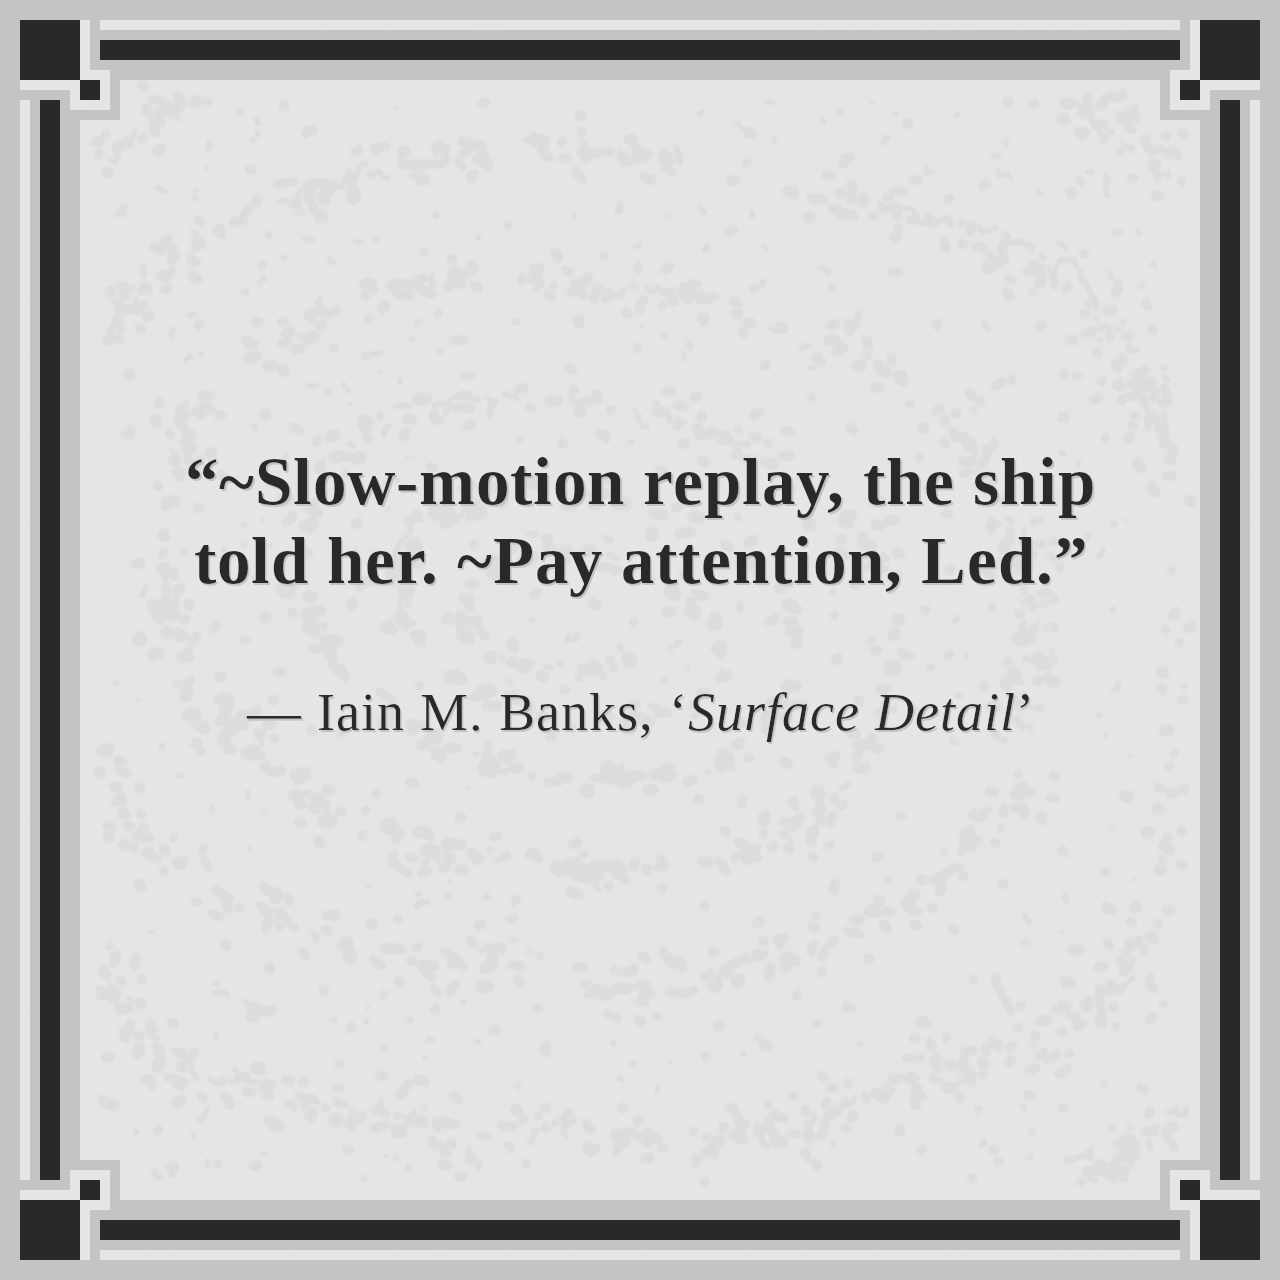 “~Slow-motion replay, the ship told her. ~Pay attention, Led.”

— Iain M. Banks, ‘Surface Detail’